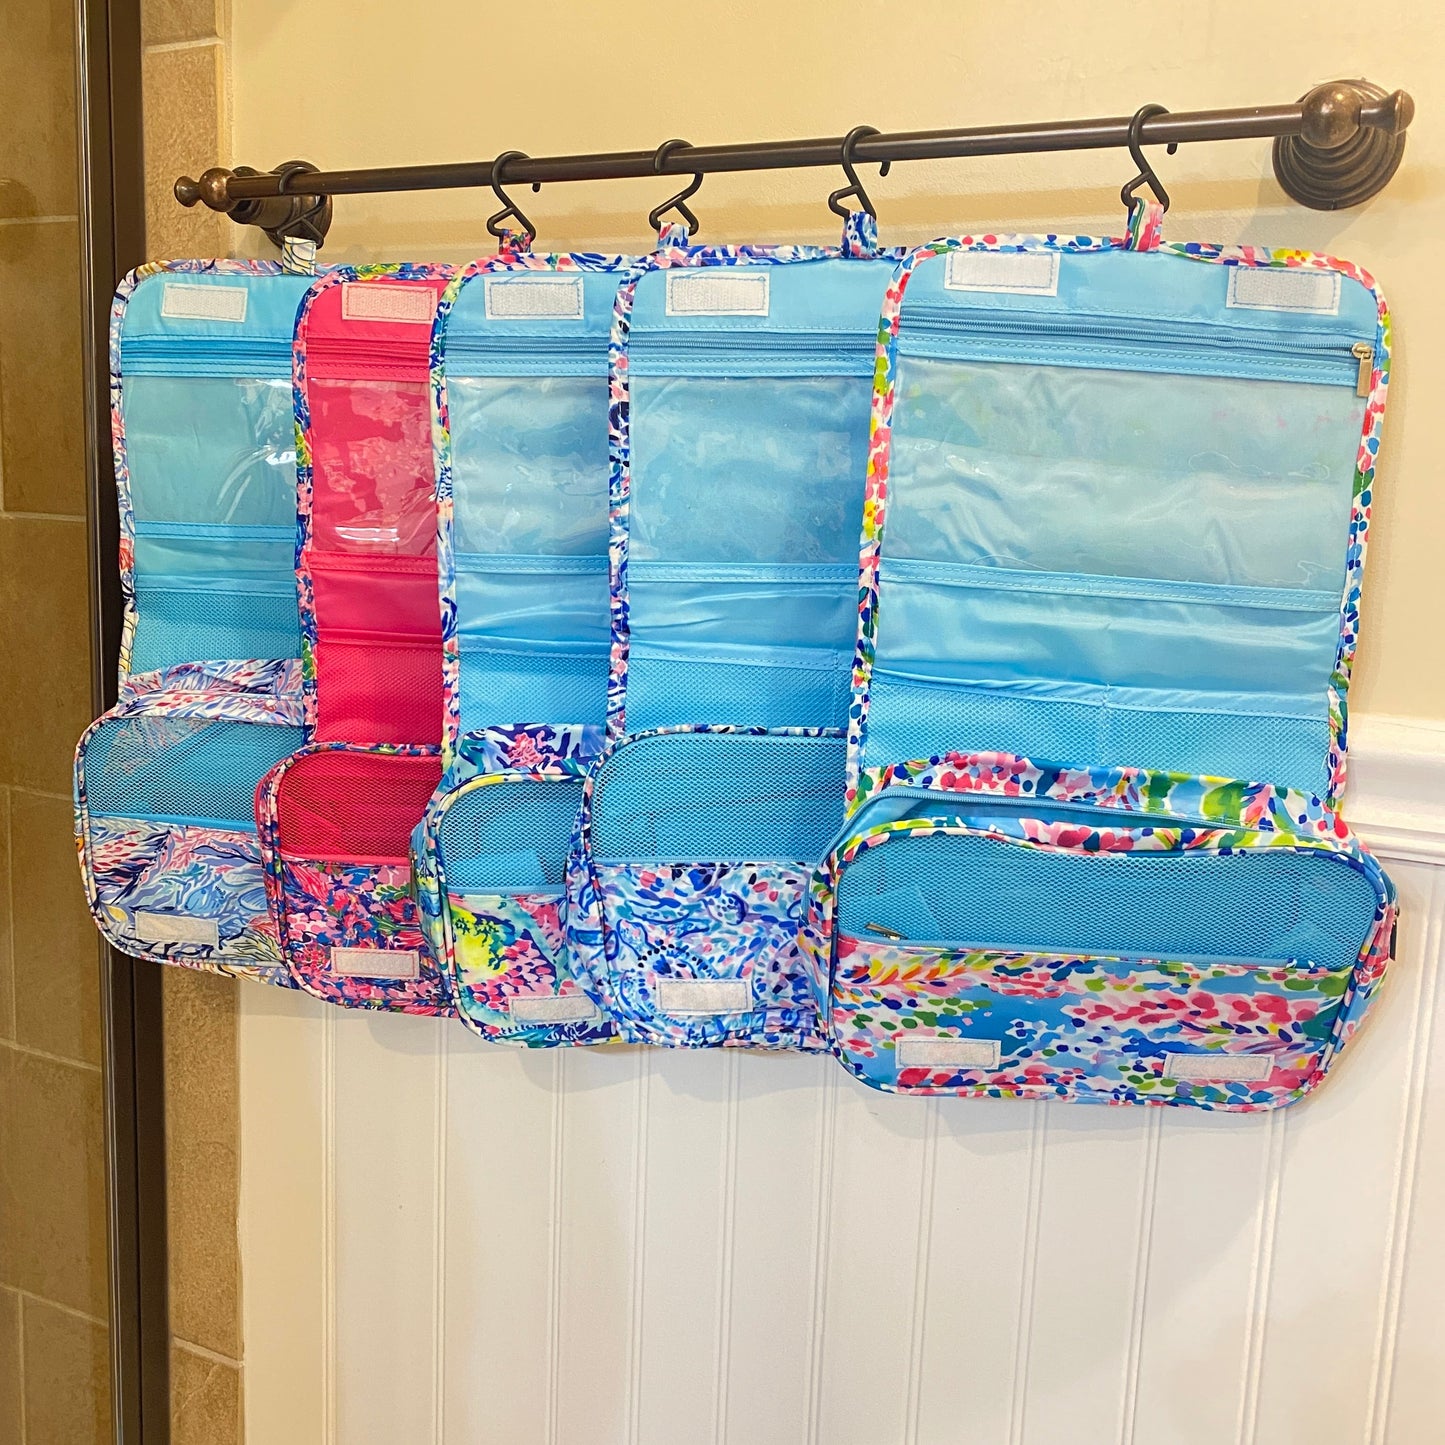 Hanging Toiletry Bag - LOCAL PICK UP OPTION